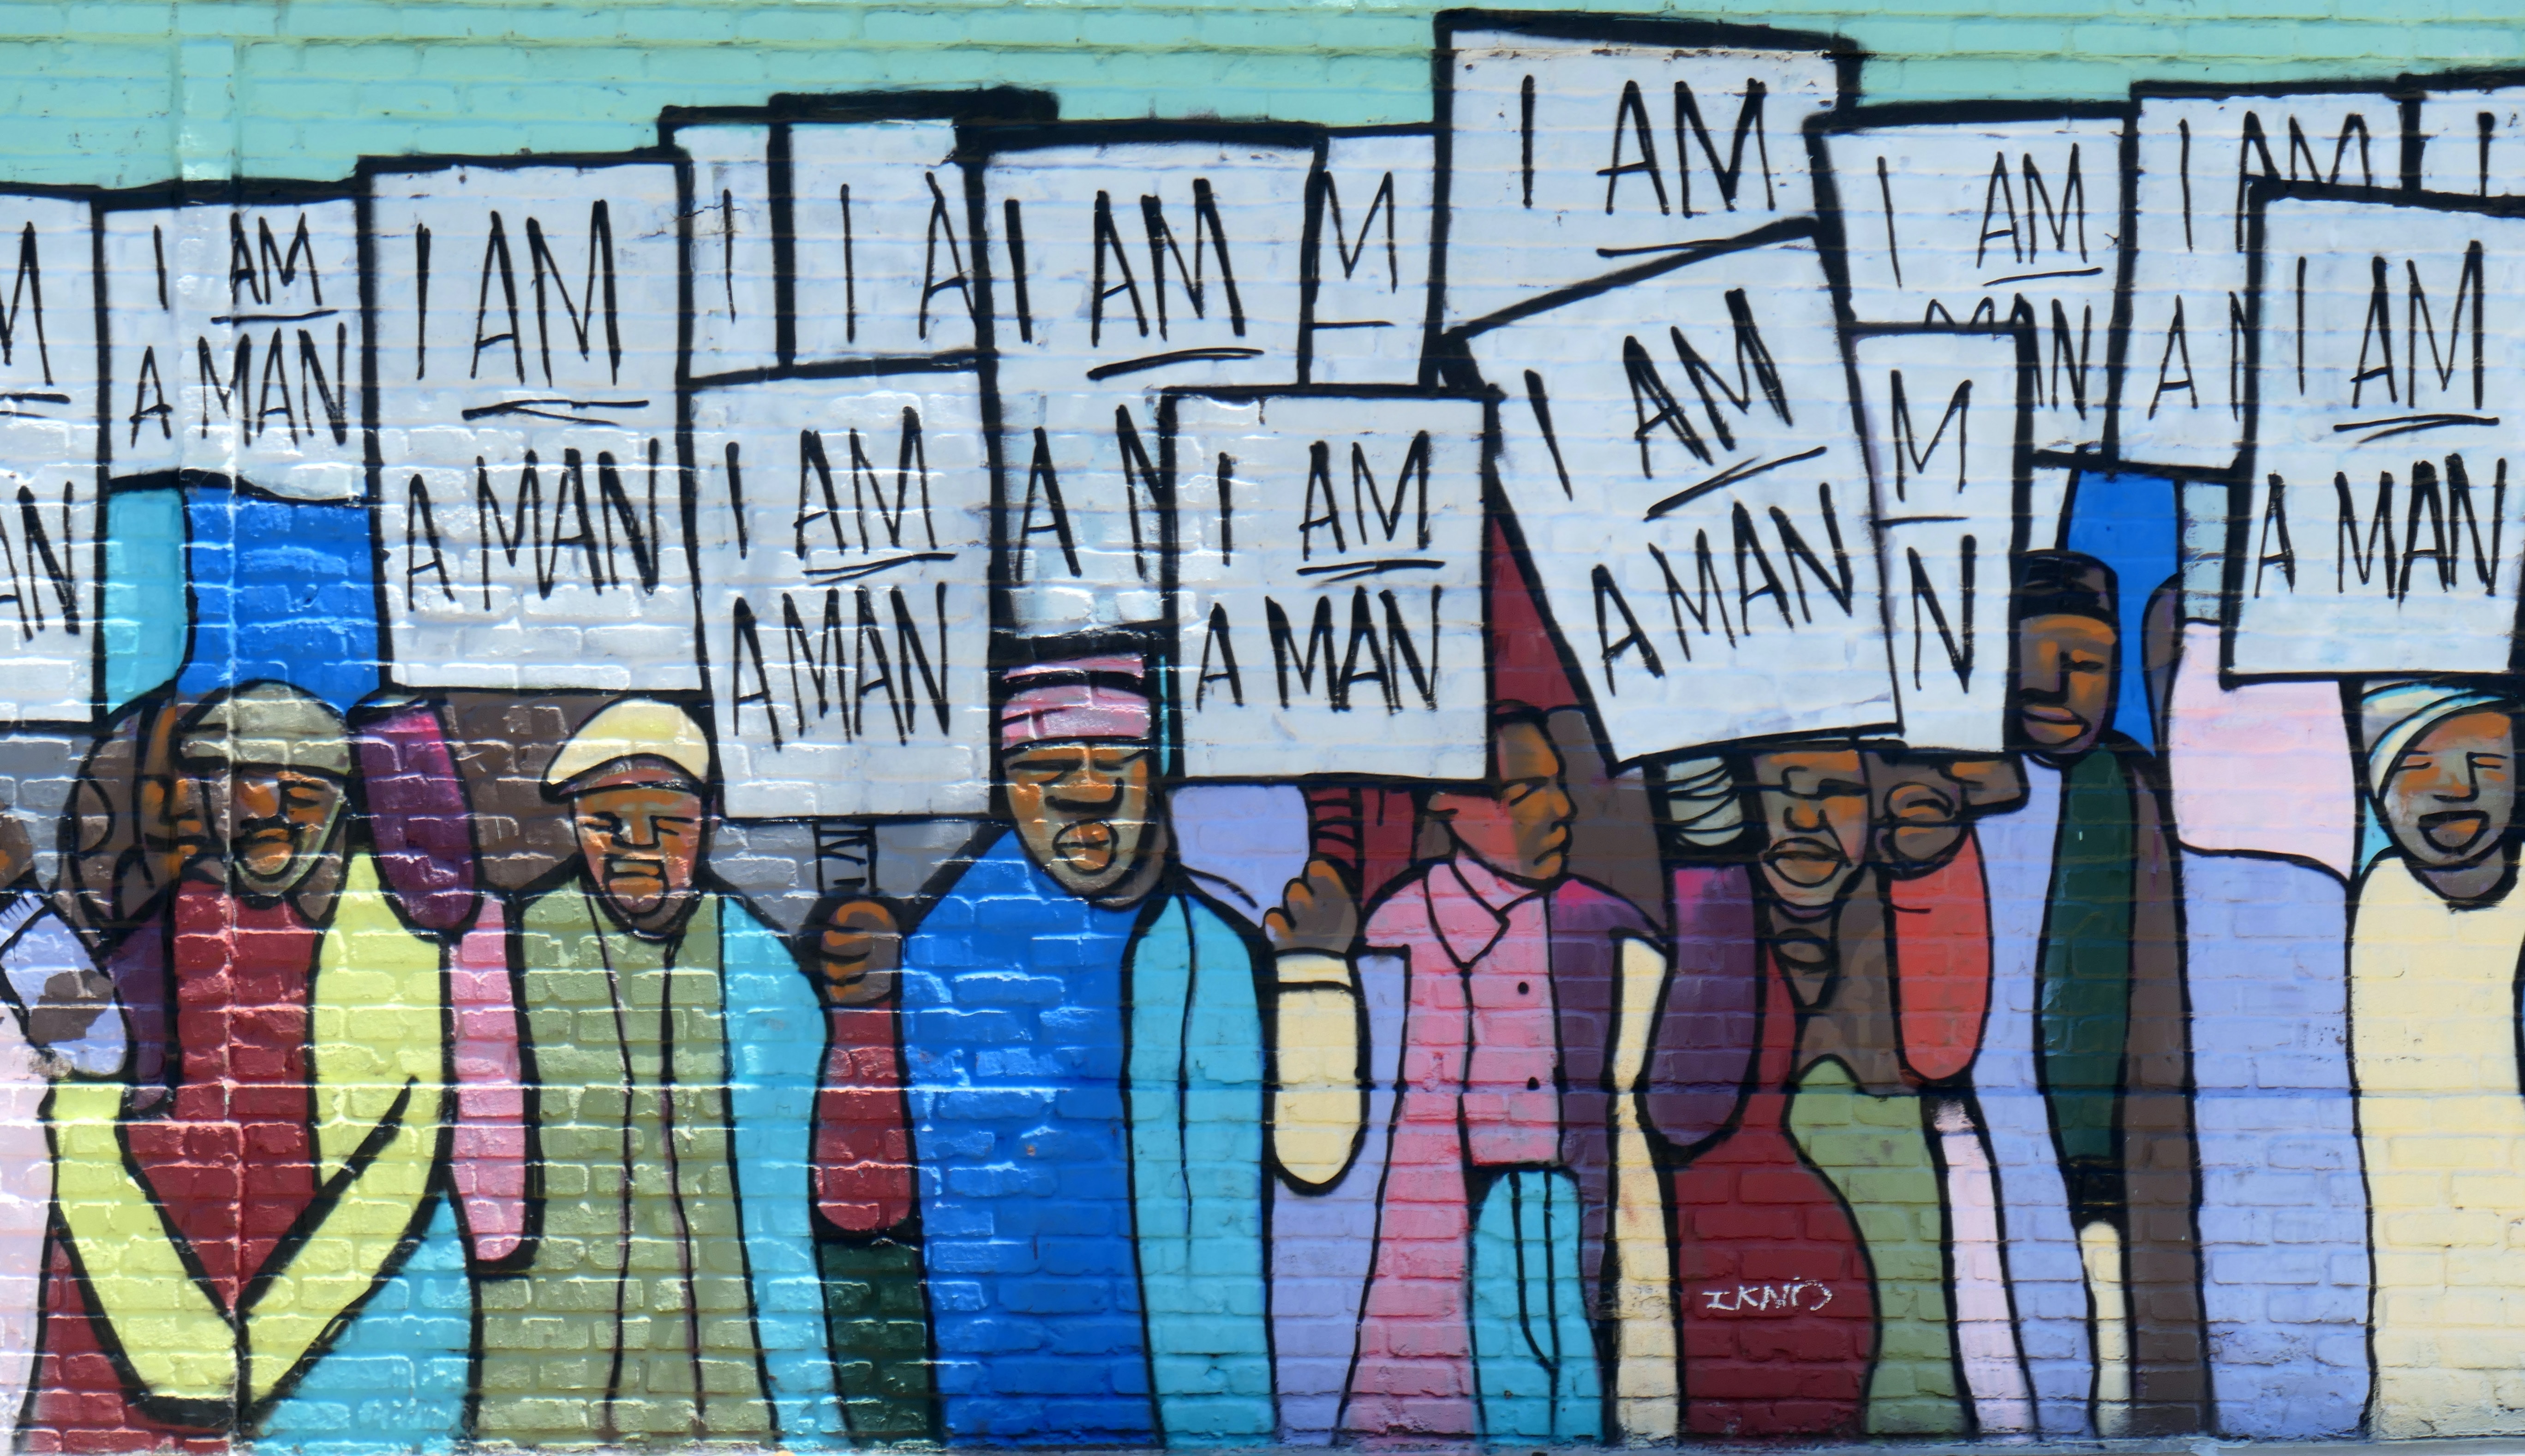 Colorful mural recreating a 1968 black and white photograph of Black workers in Memphis holding signs that read "I am a man"